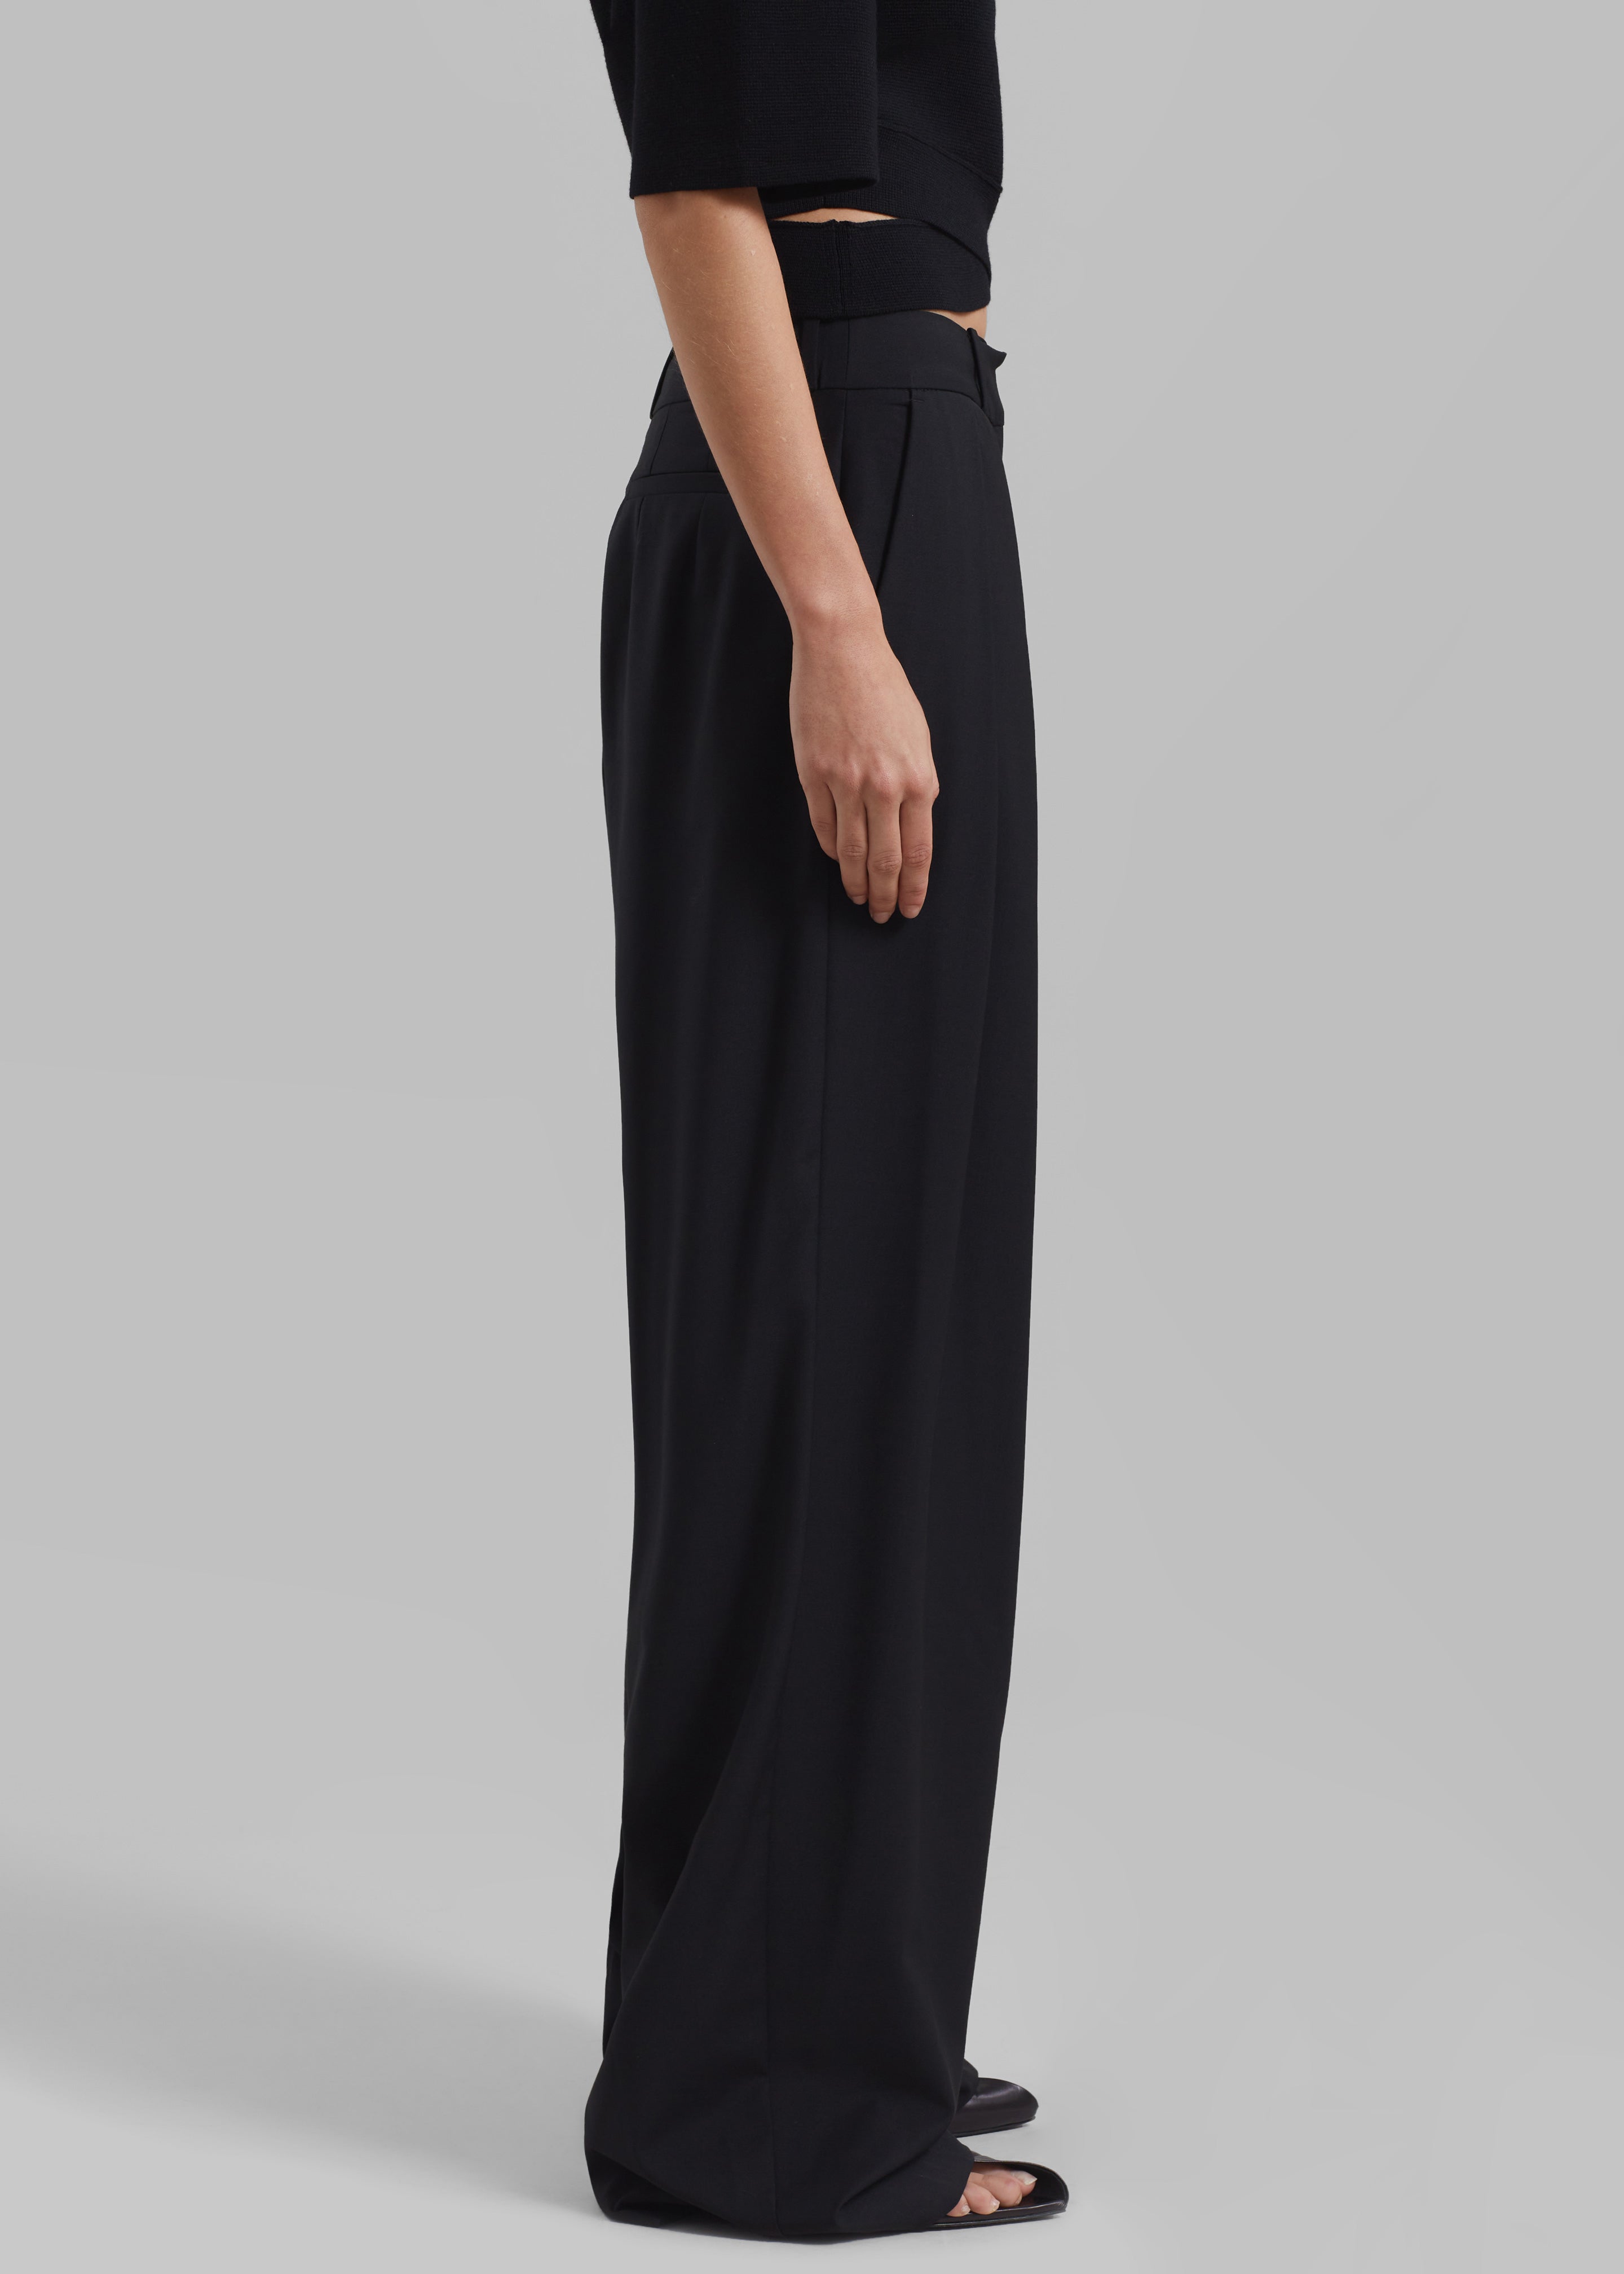 Ripley Pleated Trousers - Black - 7